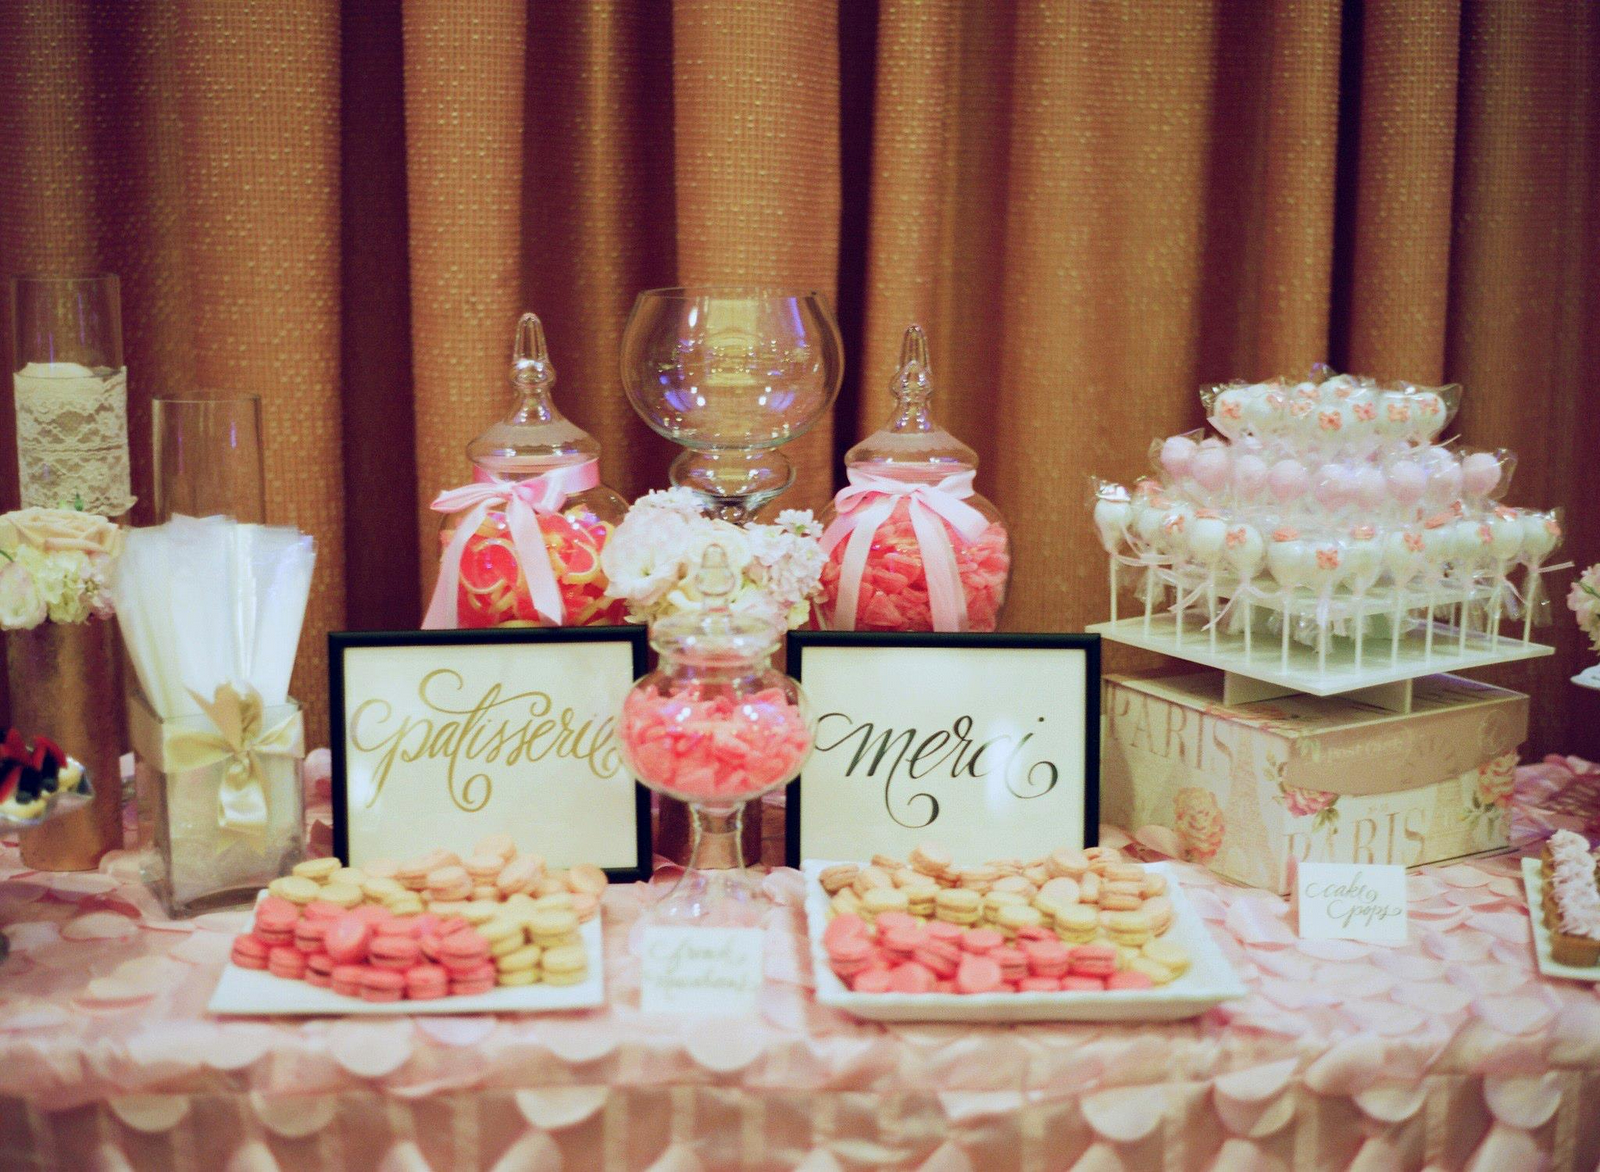 pink and gold wedding cake made three macaron flavors, pink with chocolate ganache, light pink 